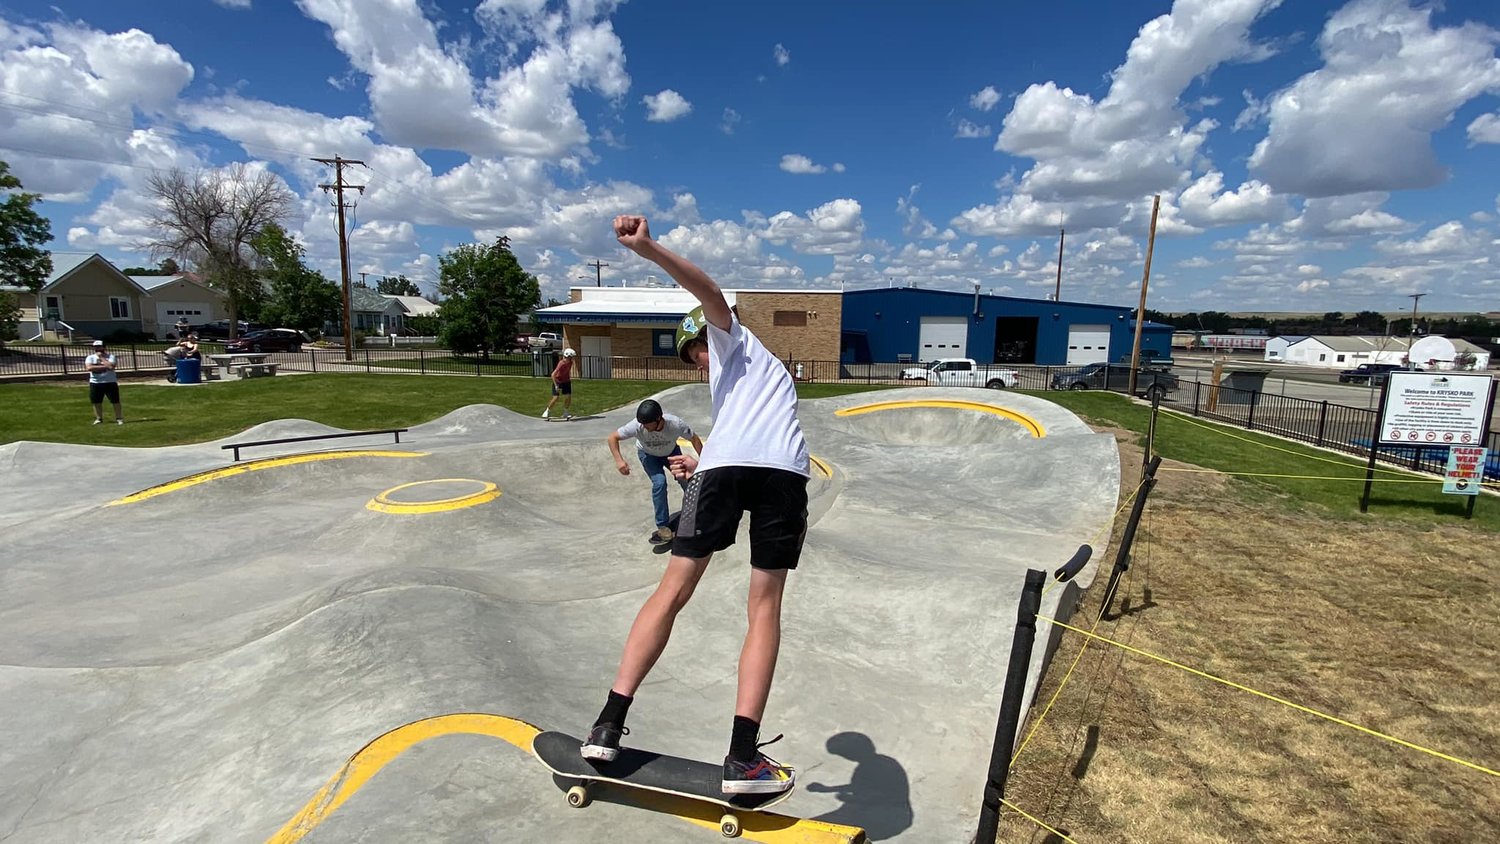 Shelby, Mont. teen Wyatt Doty, foreground, joined other skaters to take advantage of a clinic hosted by First Baptist Church. (Photo/First Baptist Shelby)